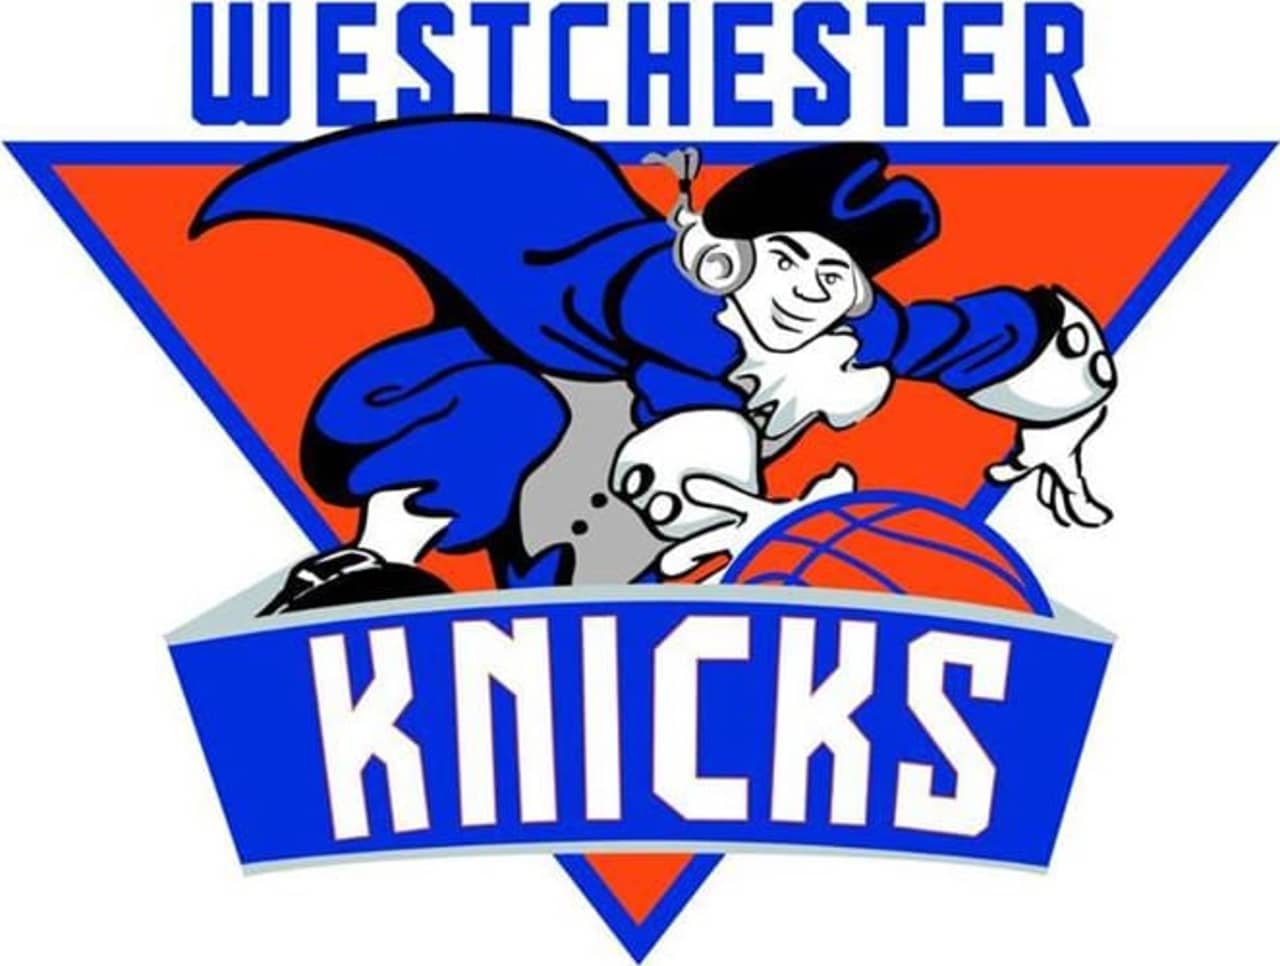 The Westchester Knicks have acquired 16 players for the 2013-2014 season. 